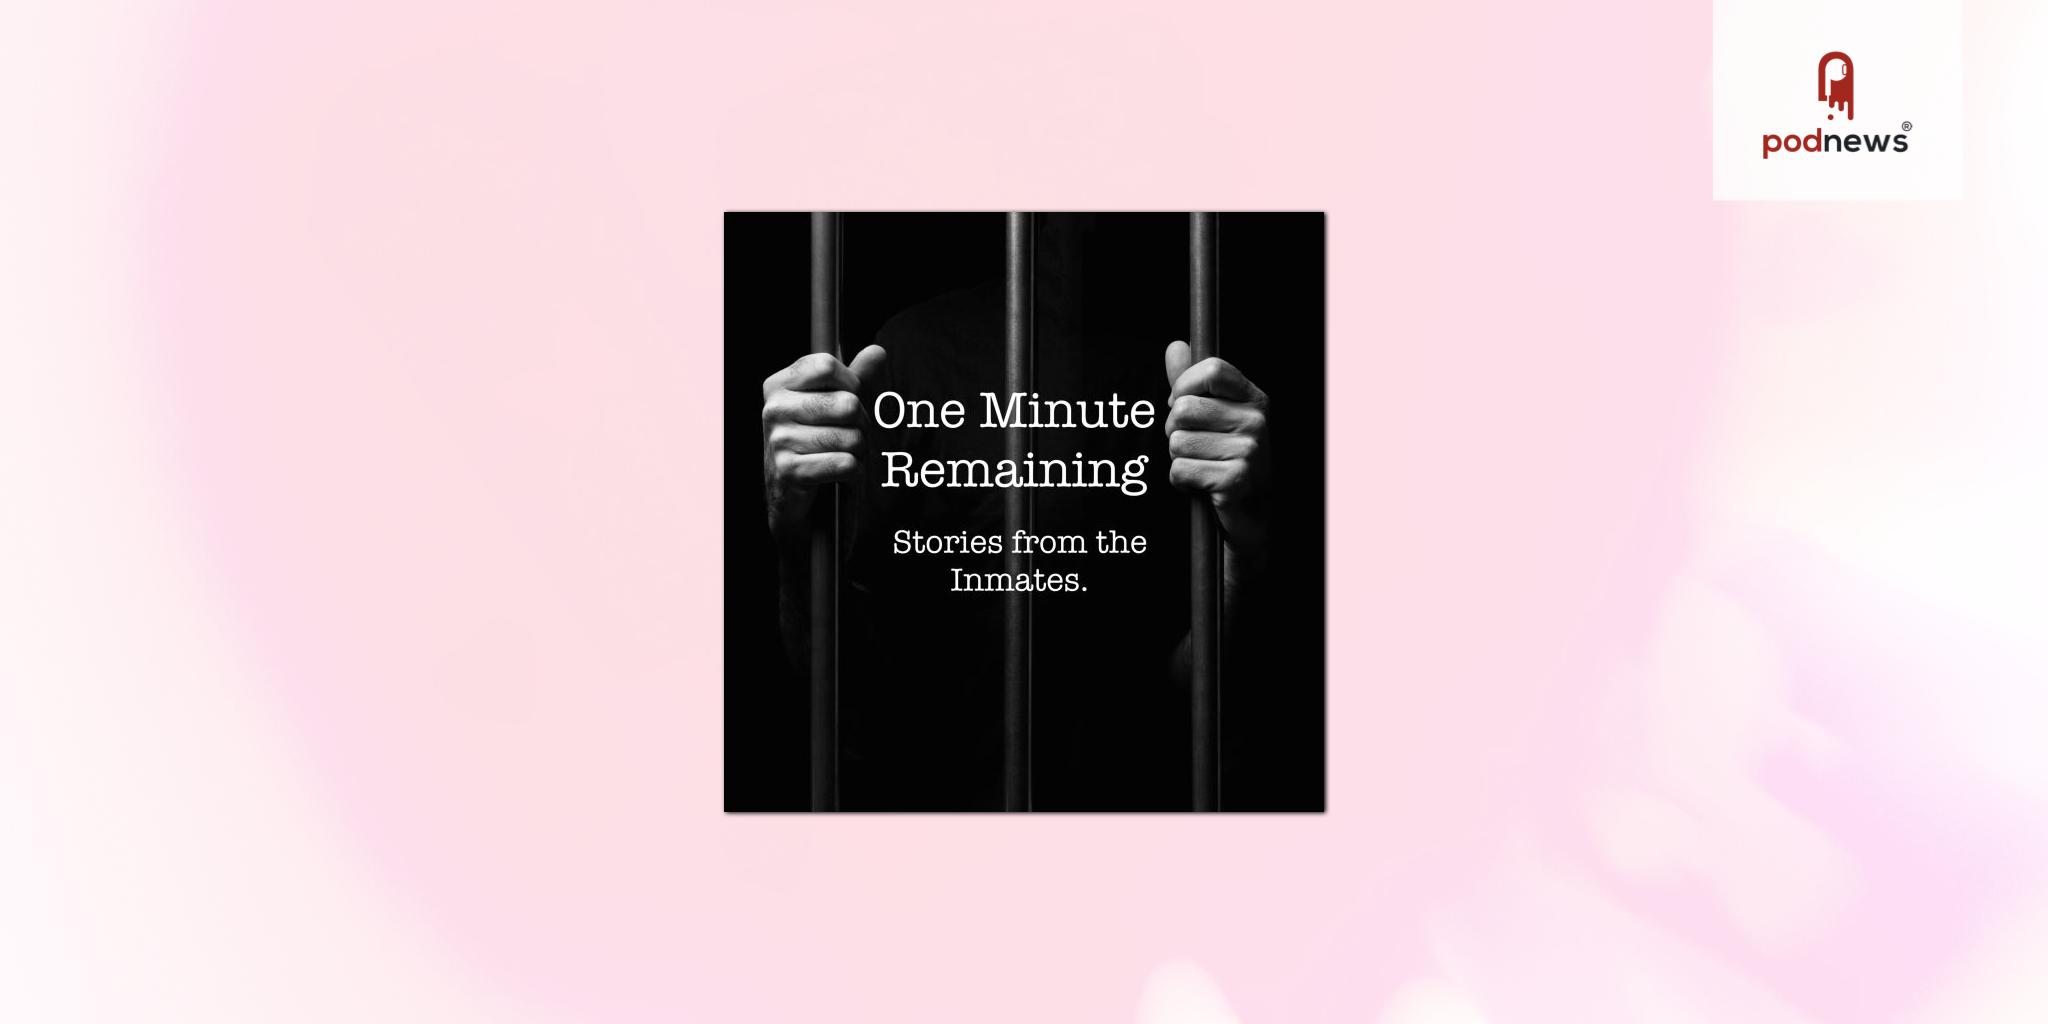 Australian True Crime Podcast ‘One Minute Remaining’ Finds Global Success, Hits 2 Million Downloads